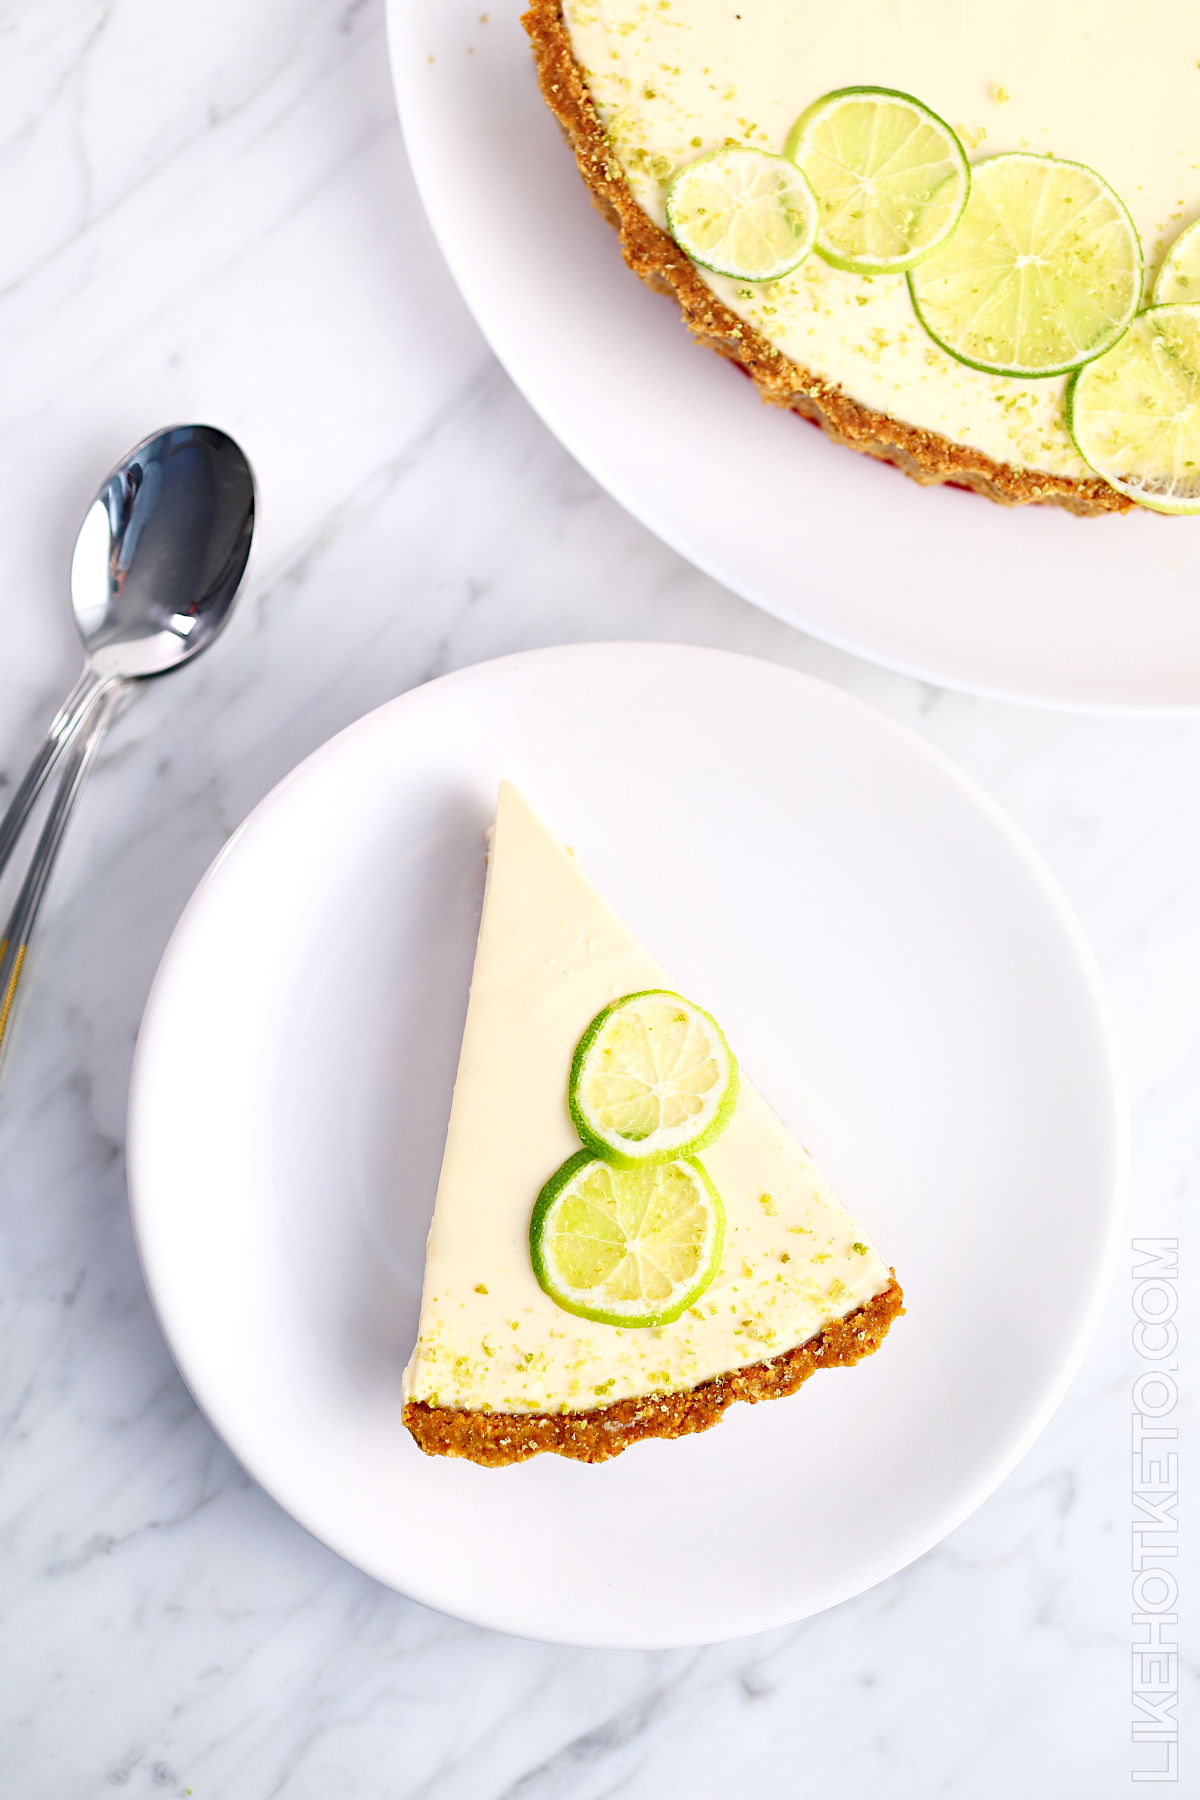 Sugar-free lime cheesecake pie served on a plate with a couple of spoons.